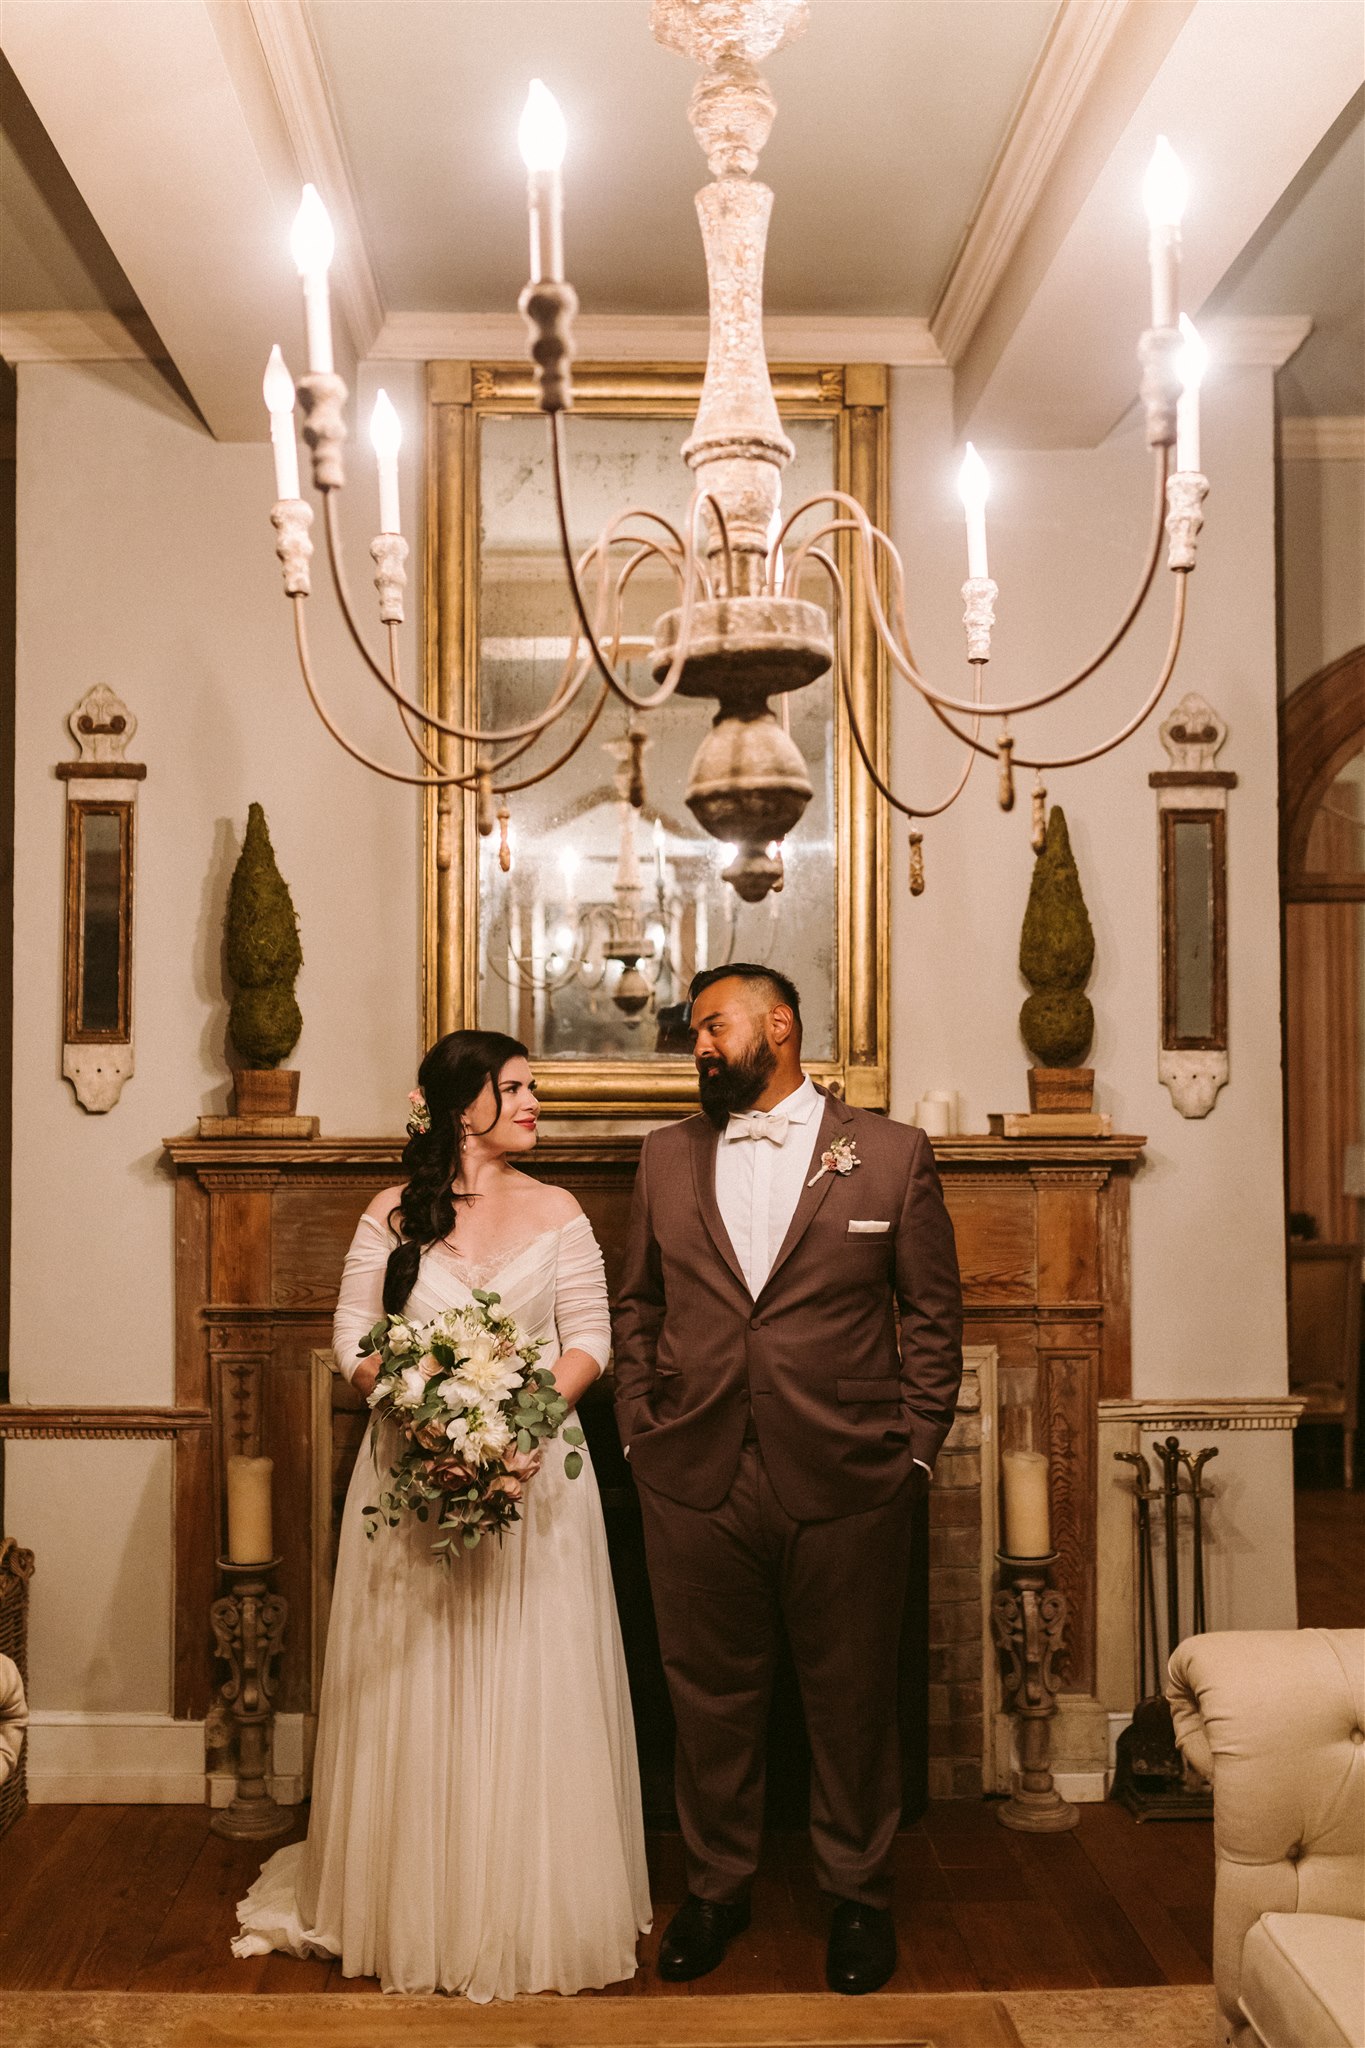 Bride and groom stand next to eachother and smile in front of the fireplace at the Retreat at Cool Spring. Image by Victoria Heer, fine art wedding photographer.